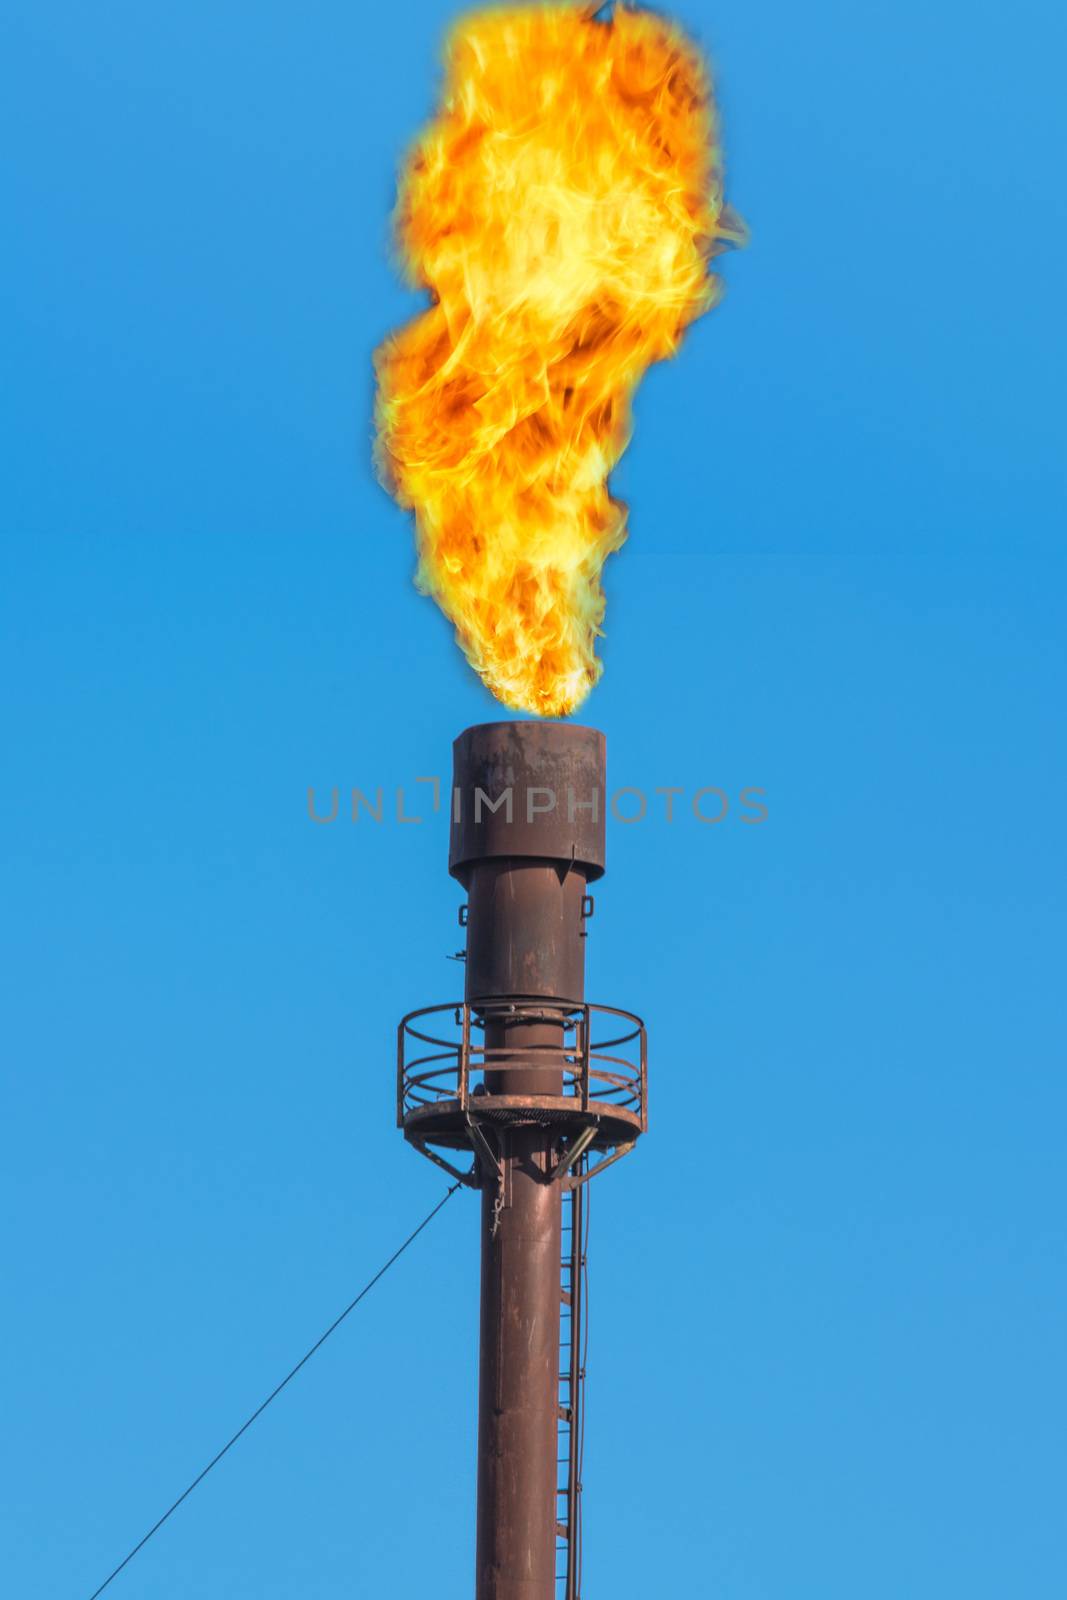 Chimney for flaring by JFsPic